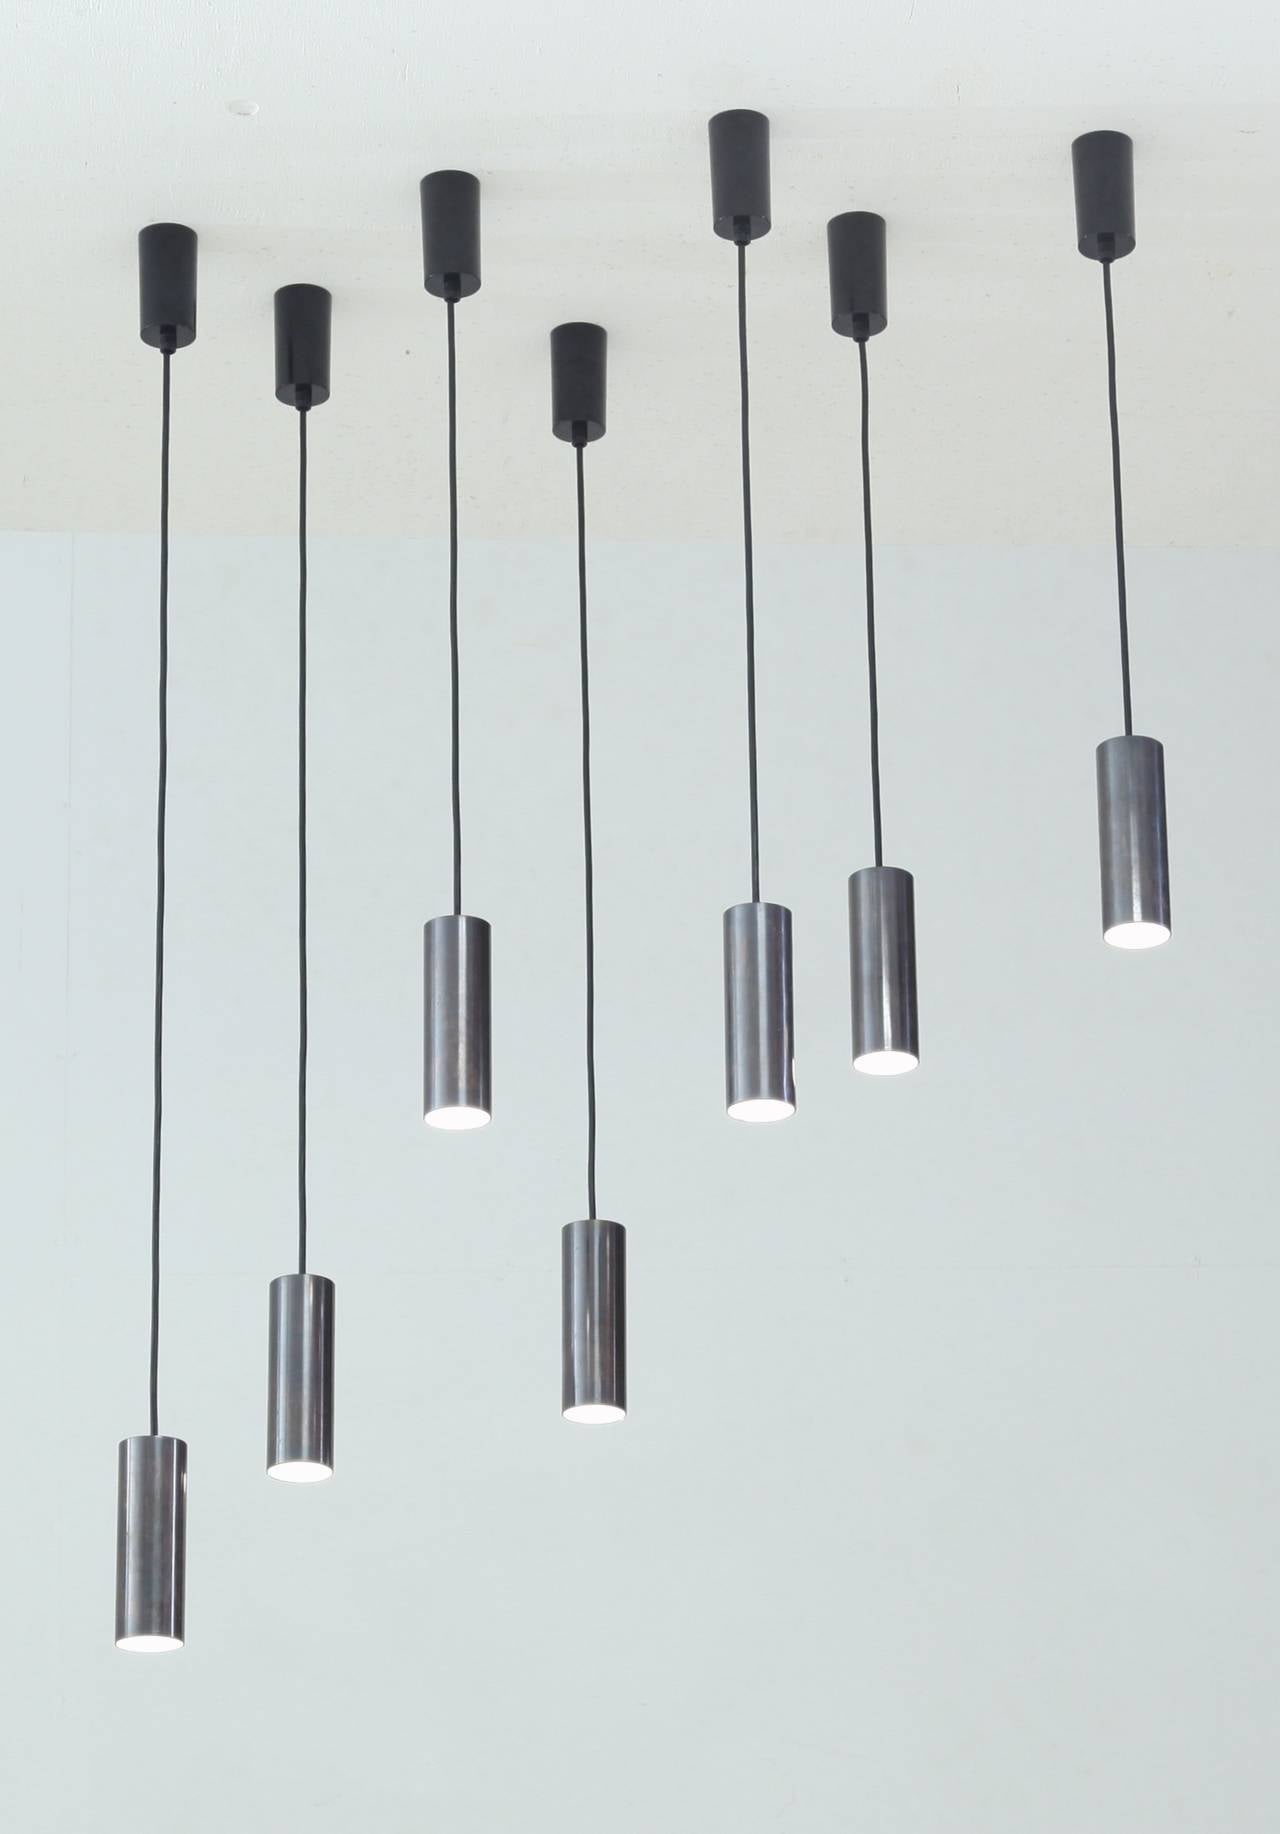 A series of seven pendants that can be hung in a straight row or free configuration.
Steel with a gunmetal finish and ceramic lampholder.